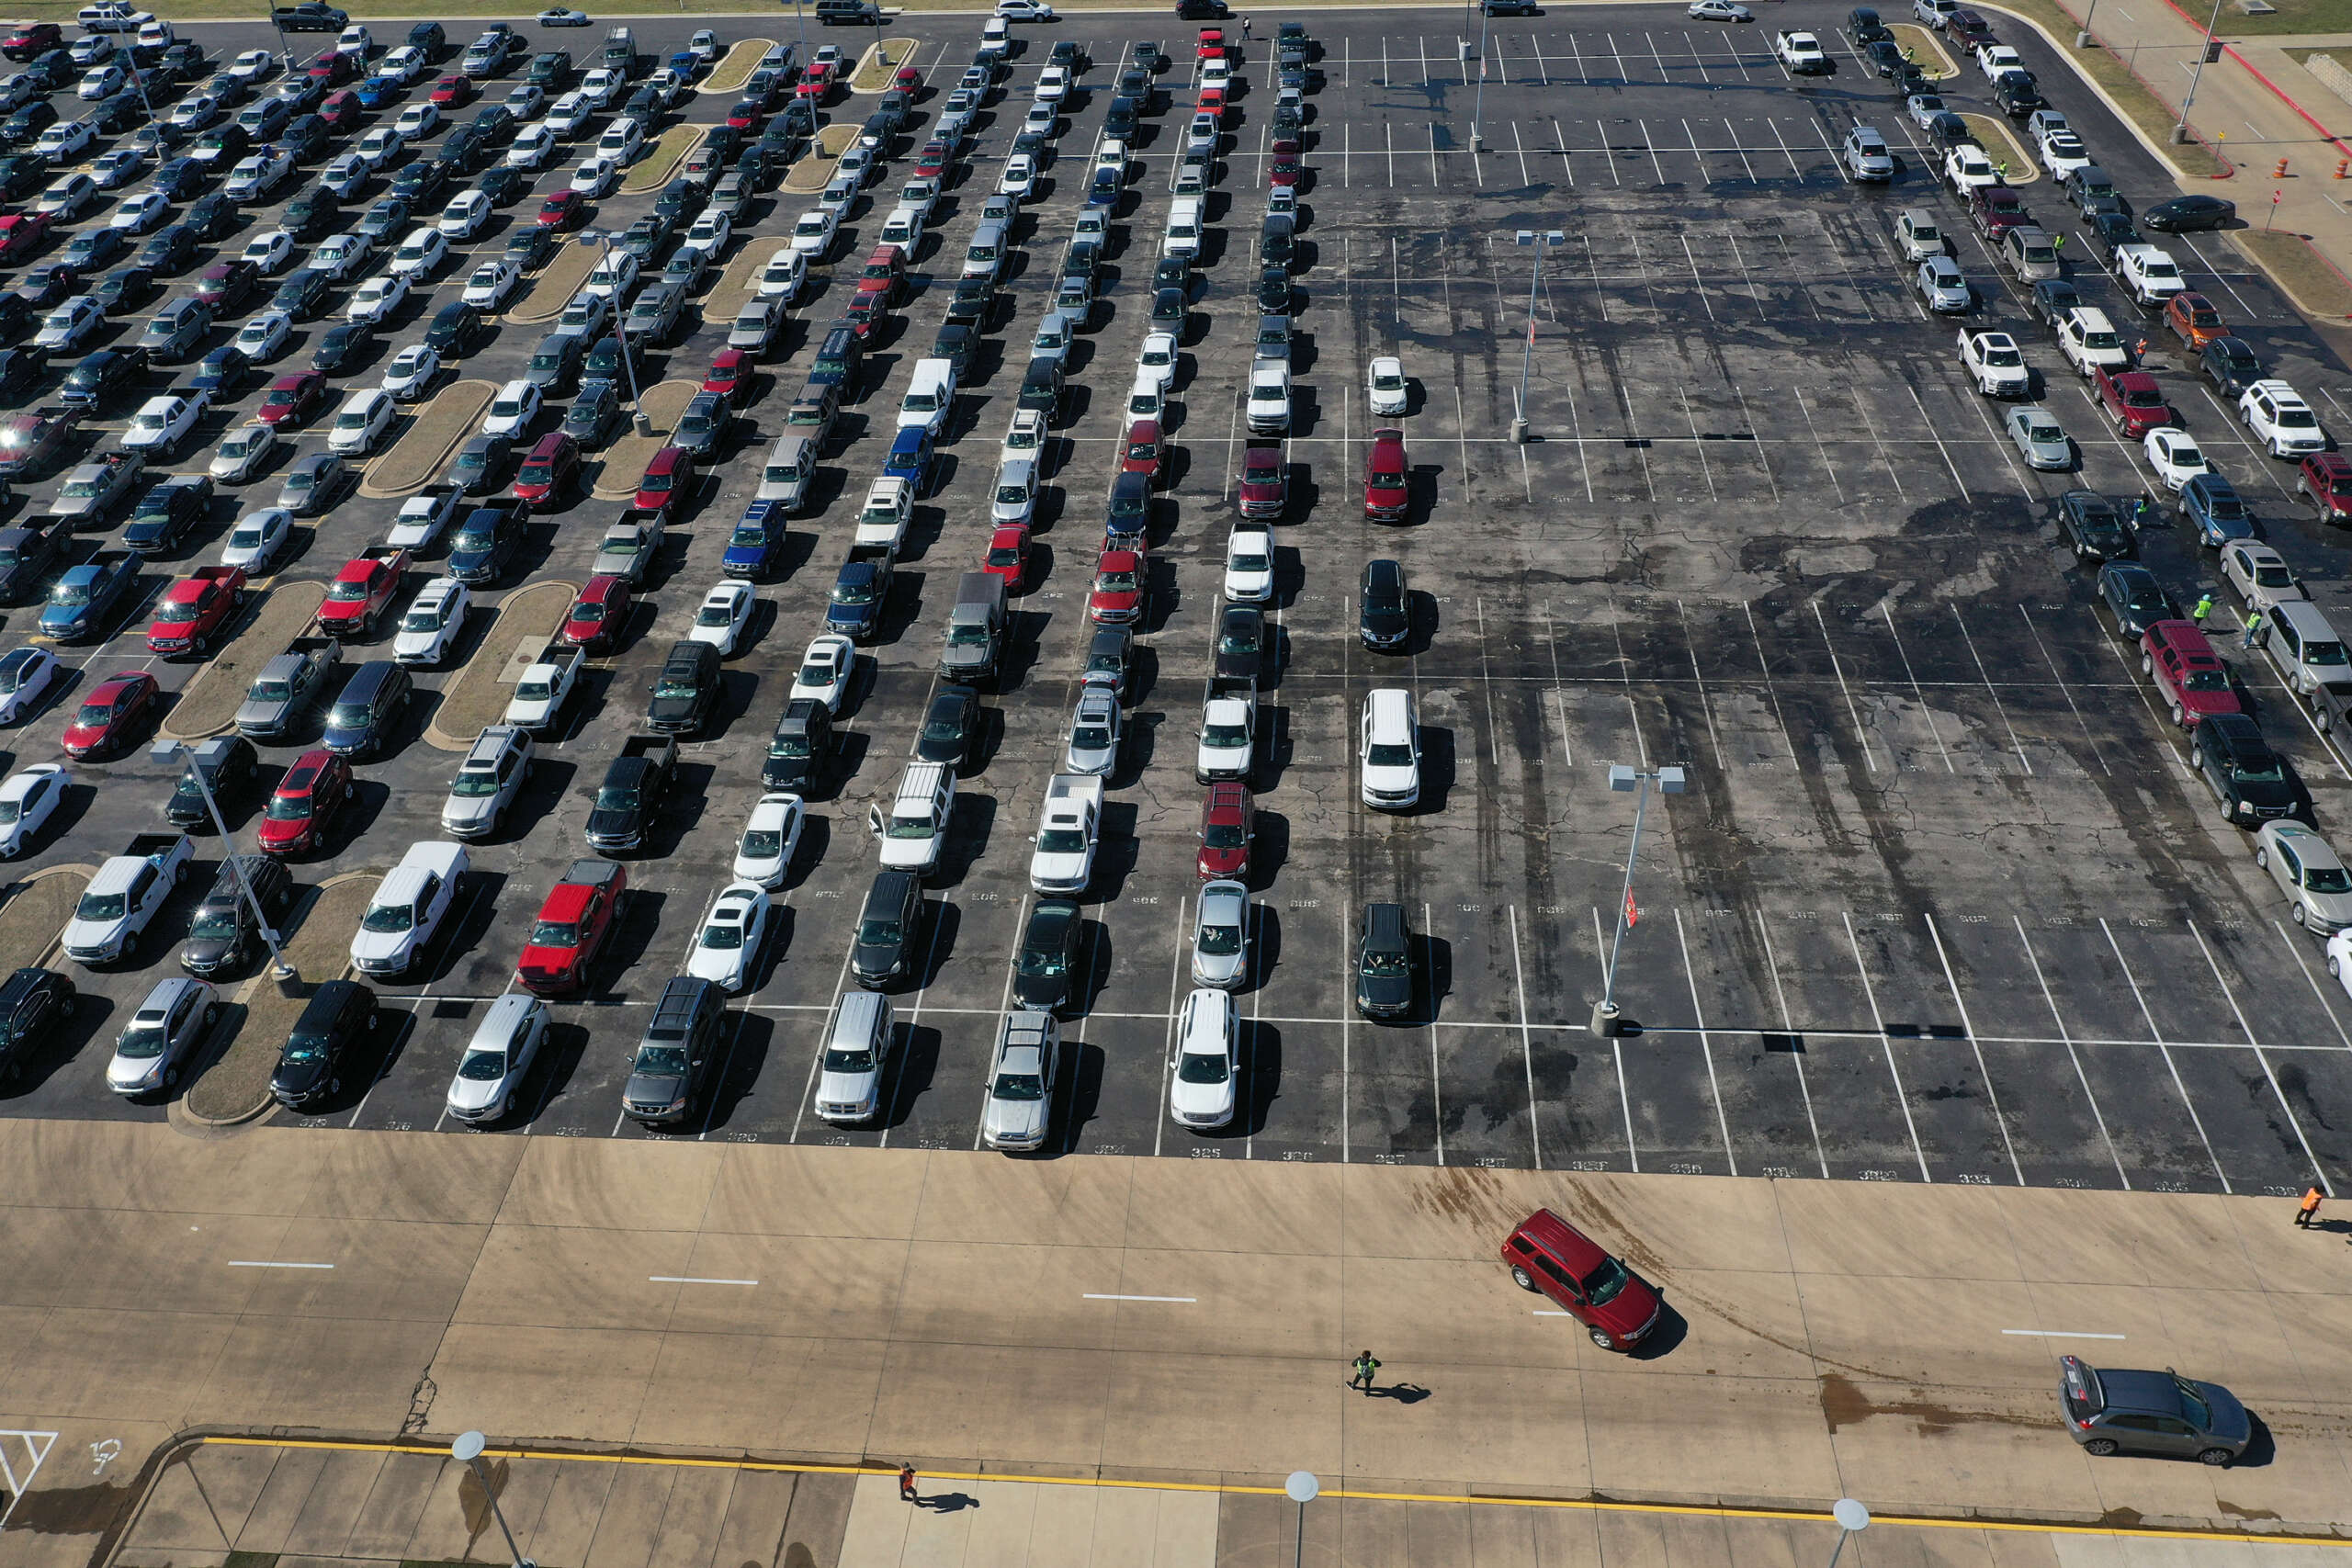 Data Suggests Port Parking Reservations On The Increase